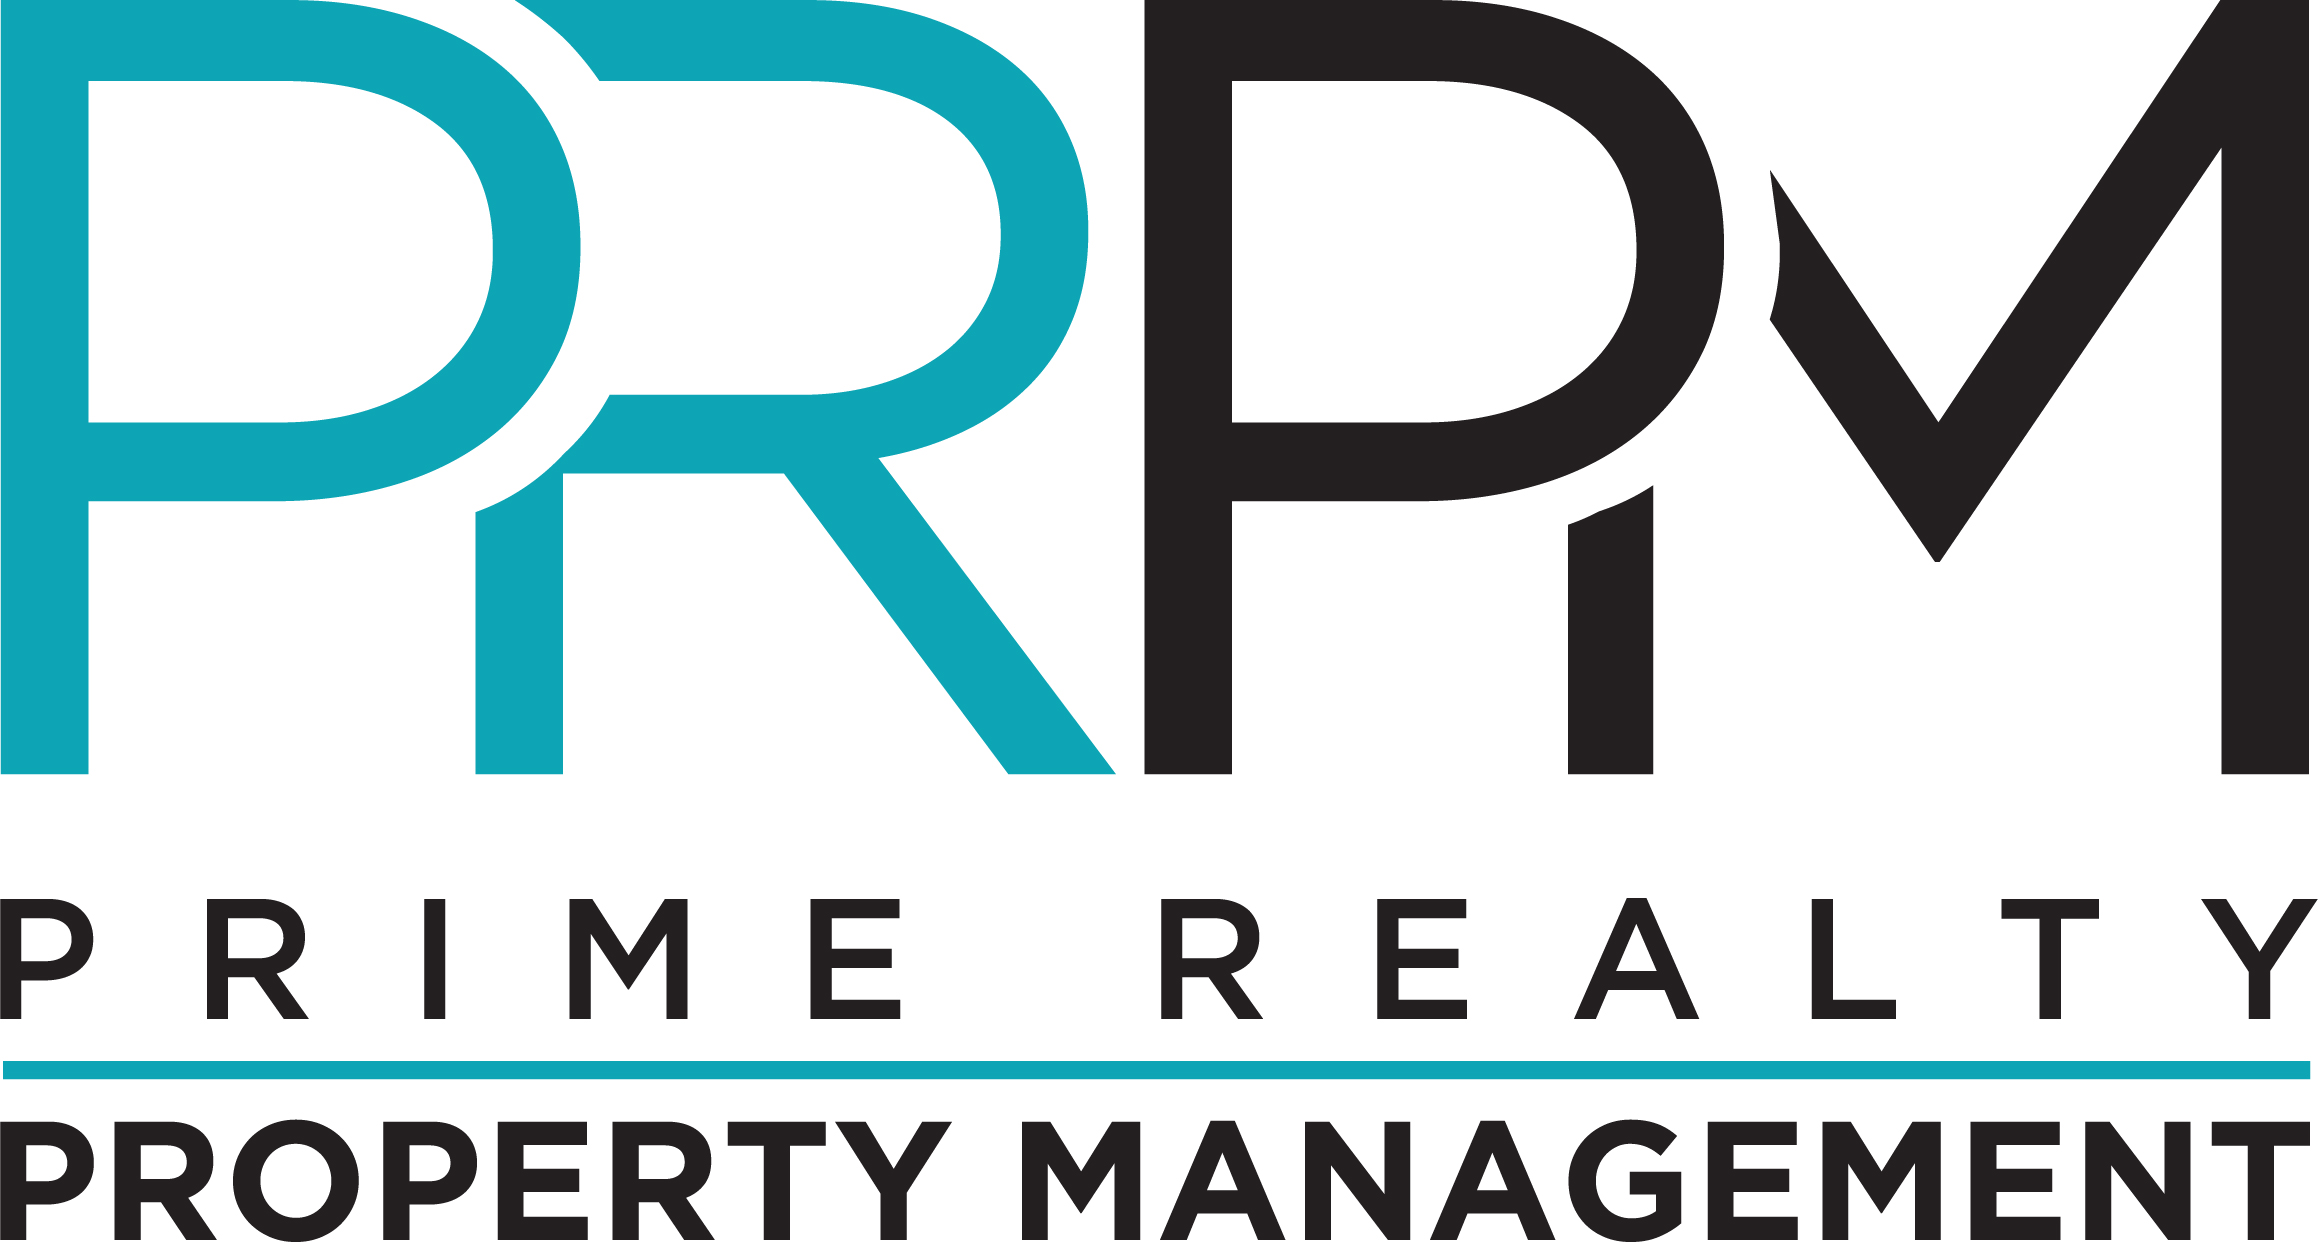 Prime Realty Property Management